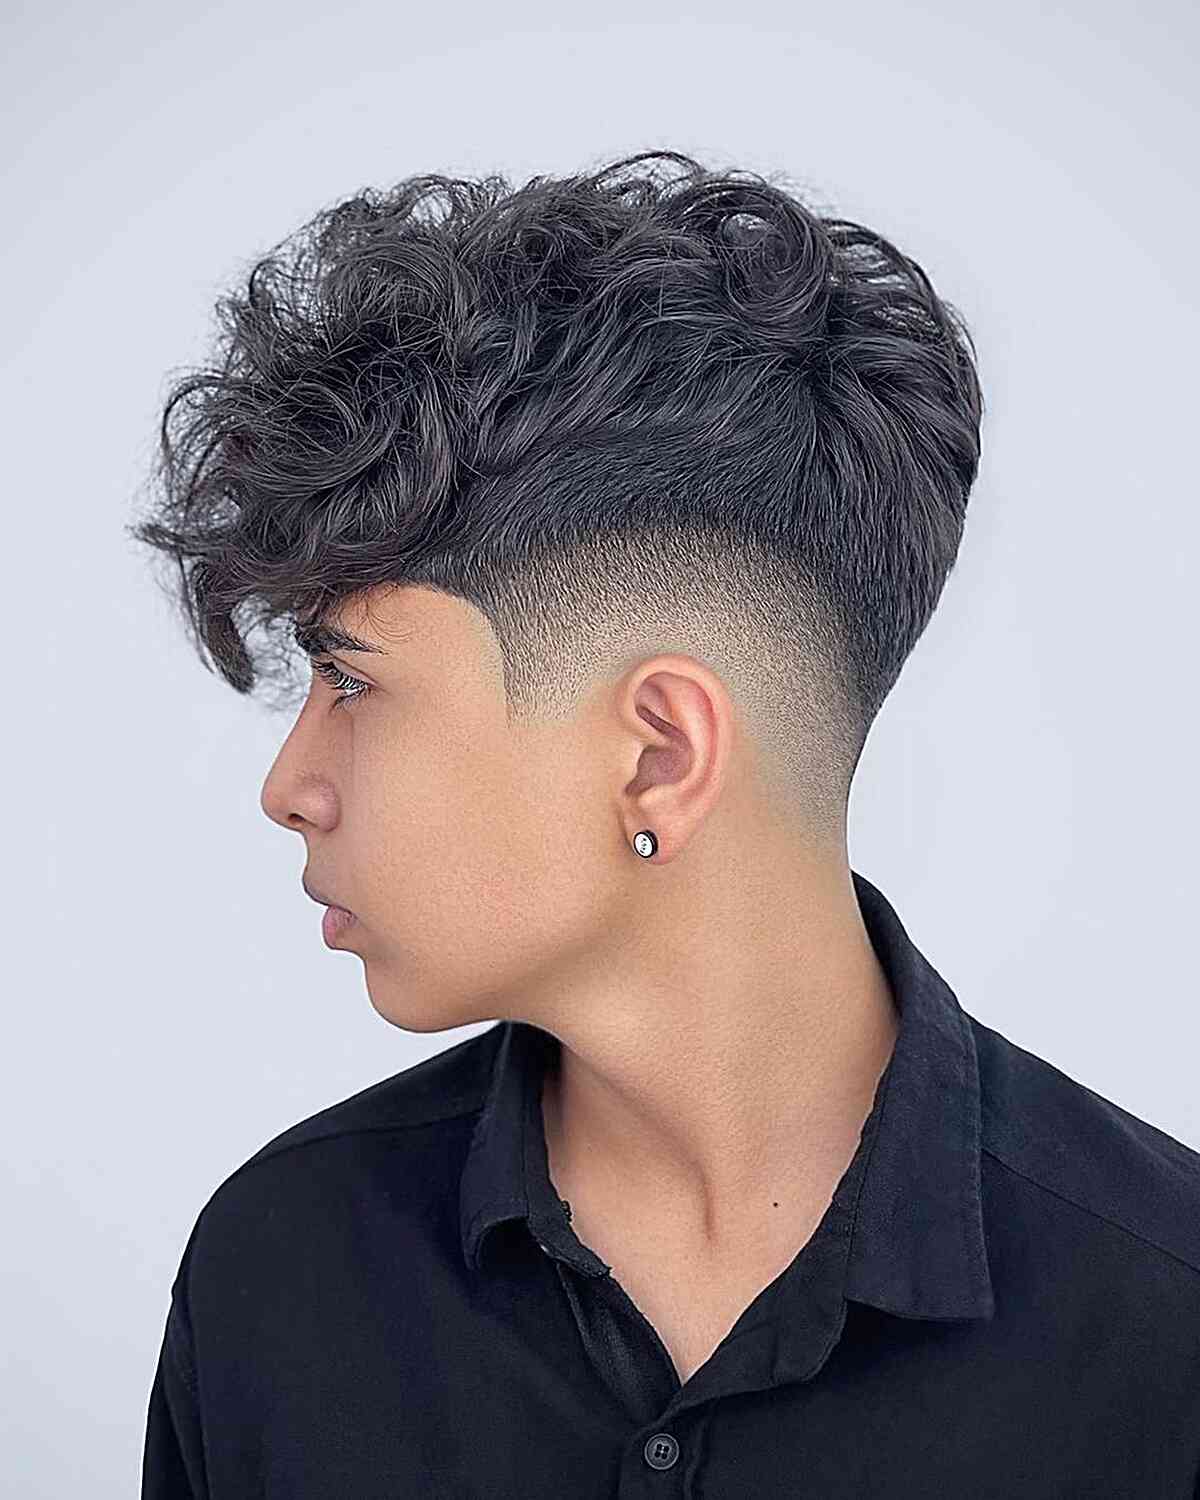 Mid-Fade with a Long Curly Faux Hawk Top for Teen Boys